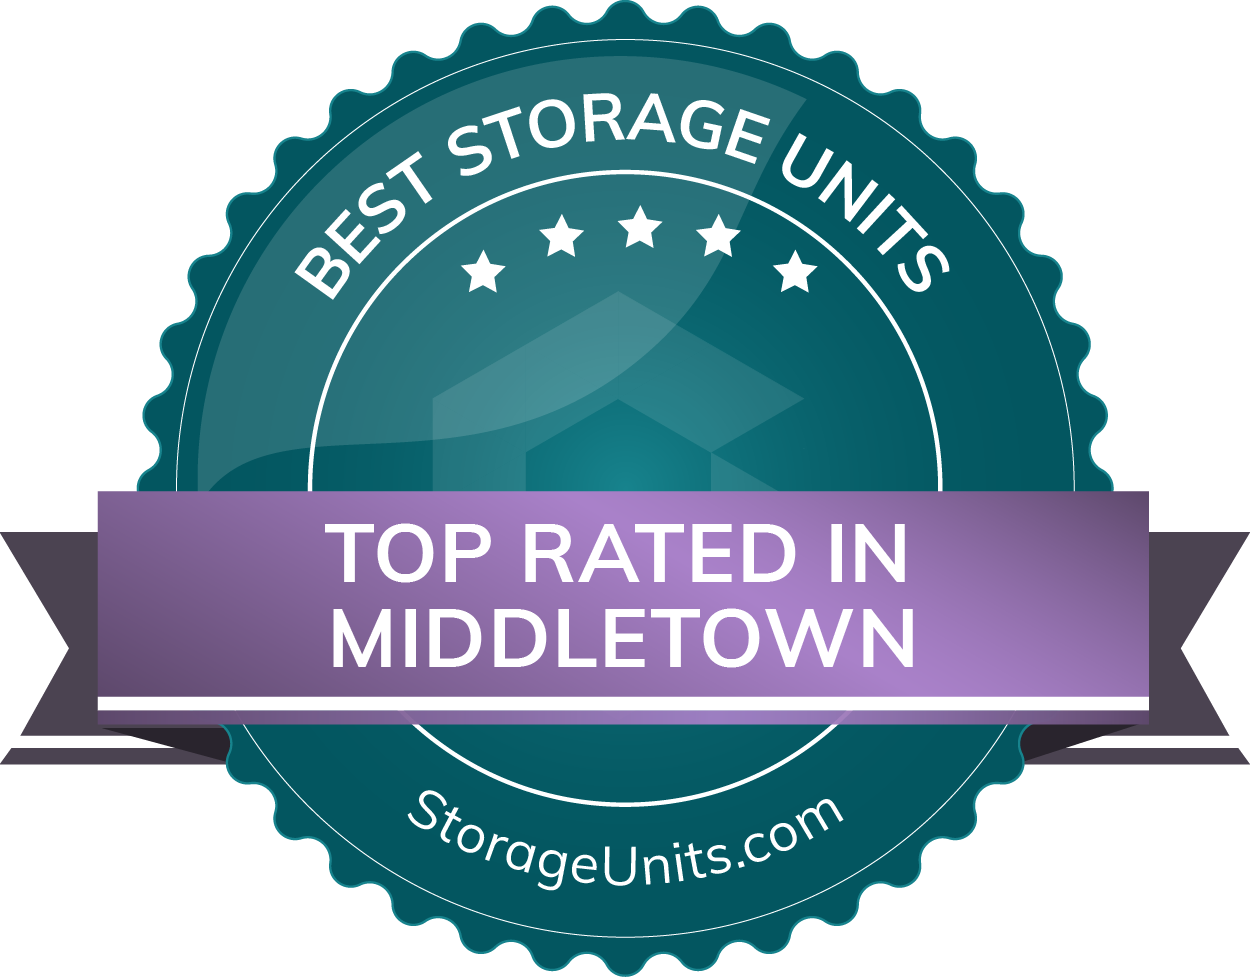 Best Self Storage Units in Middletown, New York of 2022